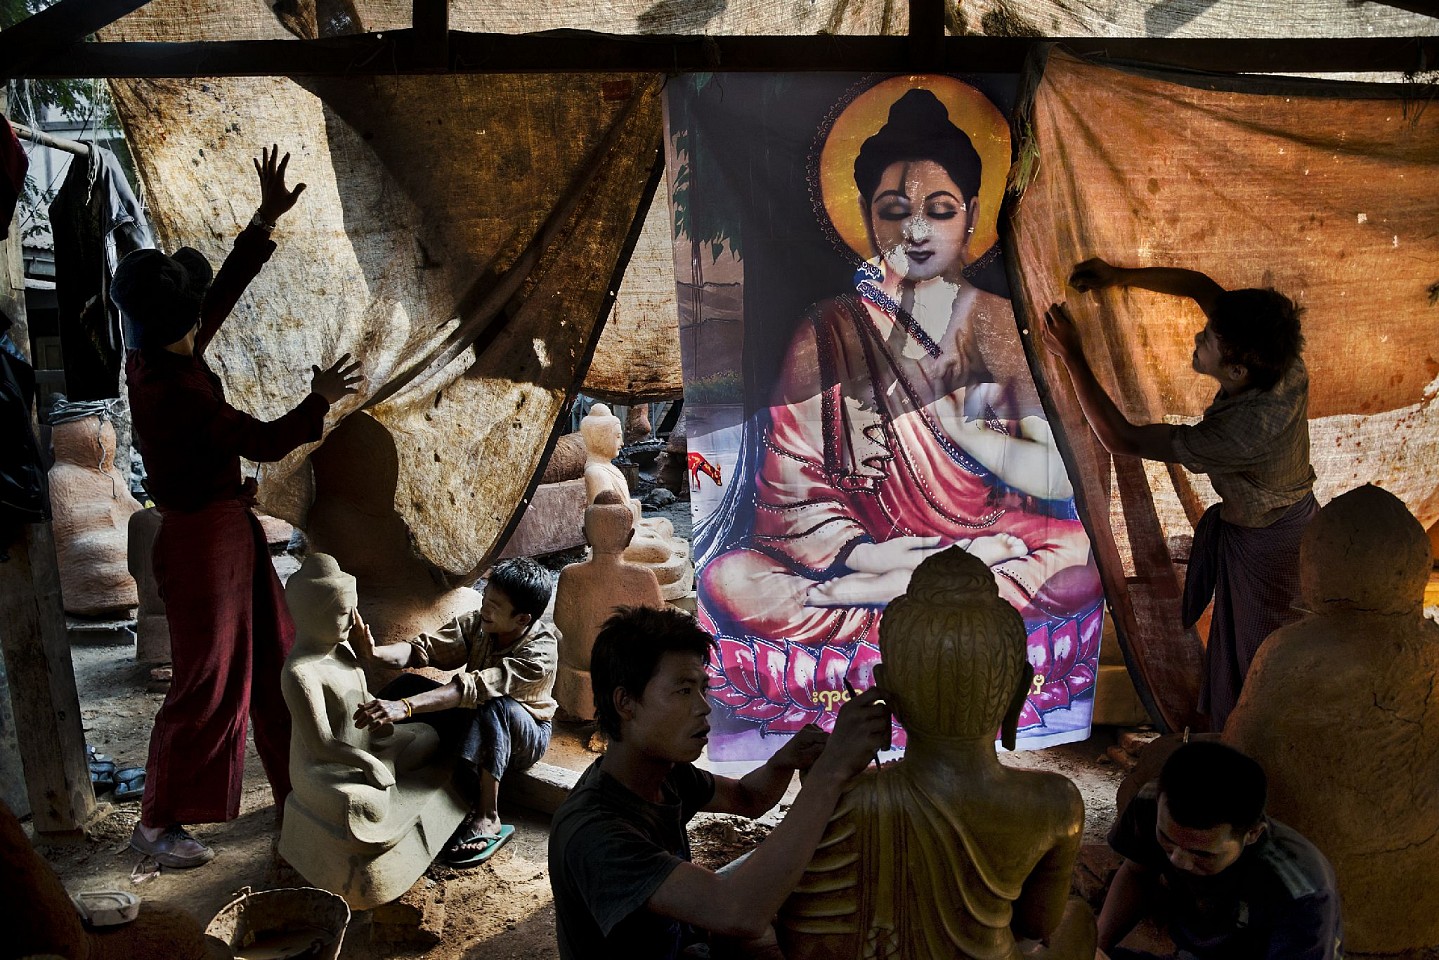 Steve McCurry, Buddha Sculpters, 2013
FujiFlex Crystal Archive Print
Price/Size on request